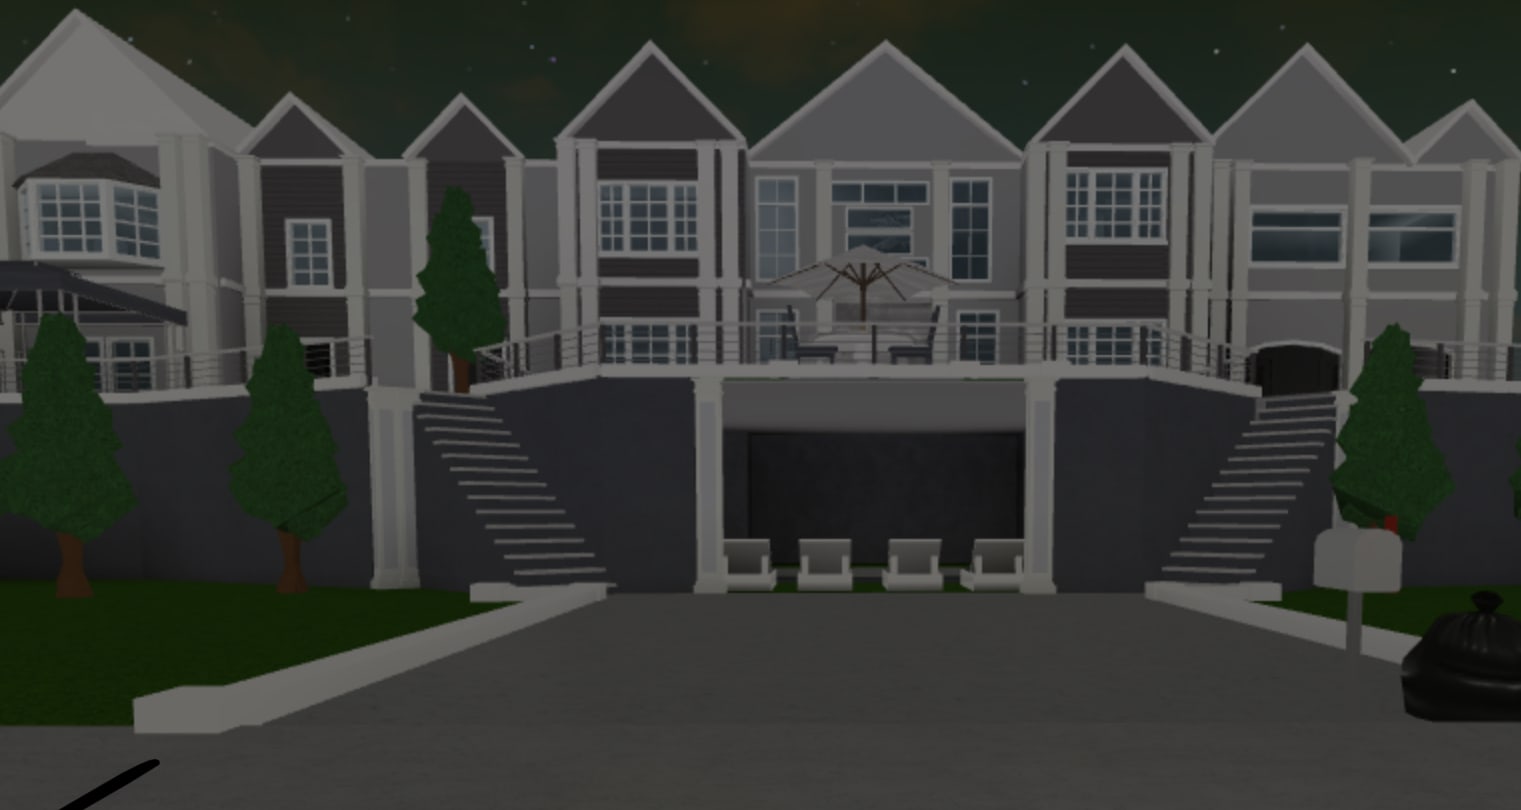 Build You A Bloxburg House Look At My Description For Packs By